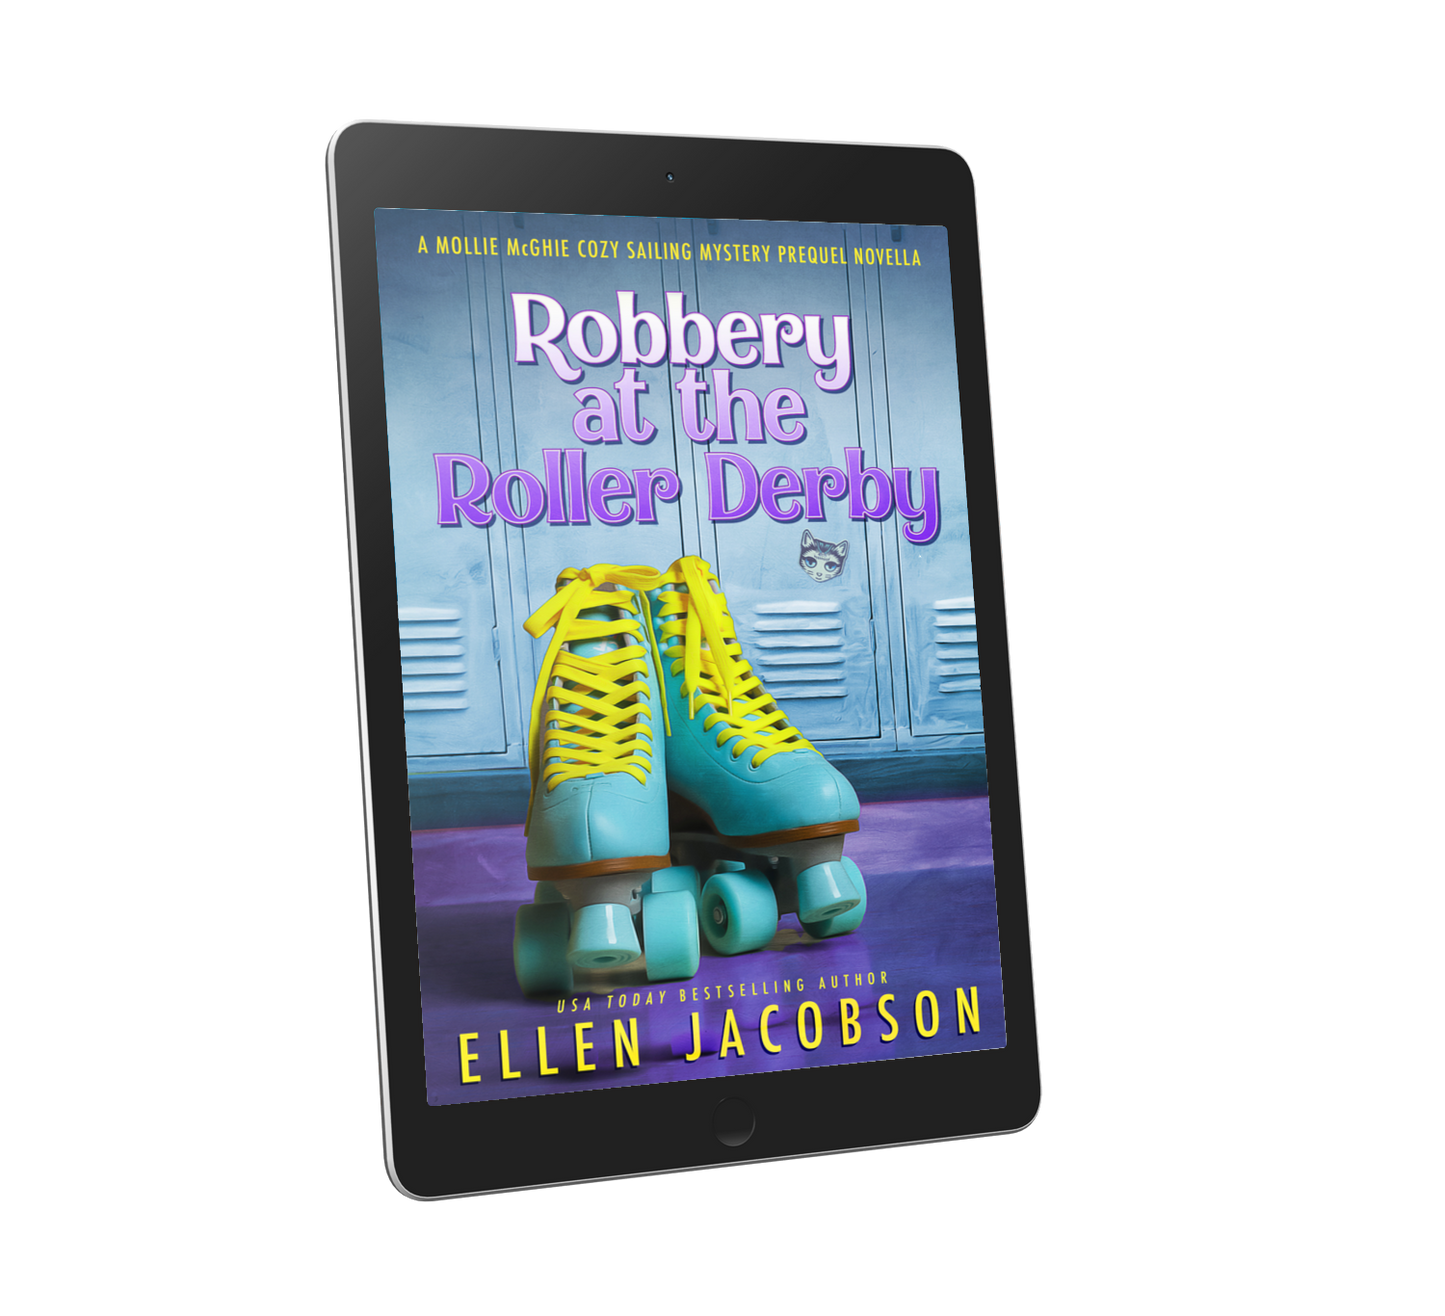 Robbery at the Roller Derby (Mollie McGhie Cozy Mystery Prequel) Ebook Cover